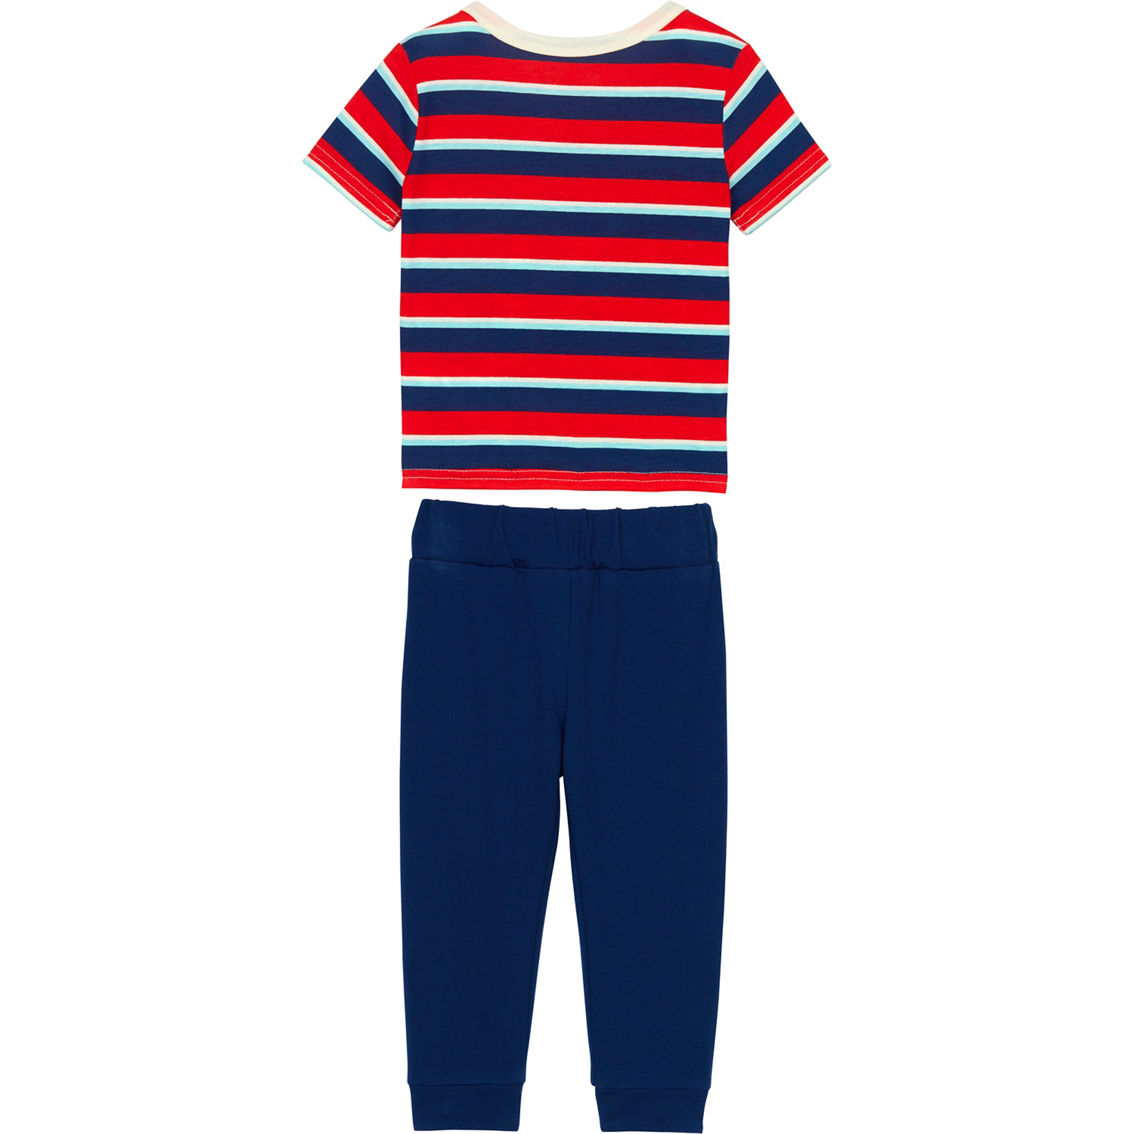 Buzz Cuts Little Boys Print Graphic Tee and French Terry Jogger Pants 2 pc. Set - Image 2 of 2